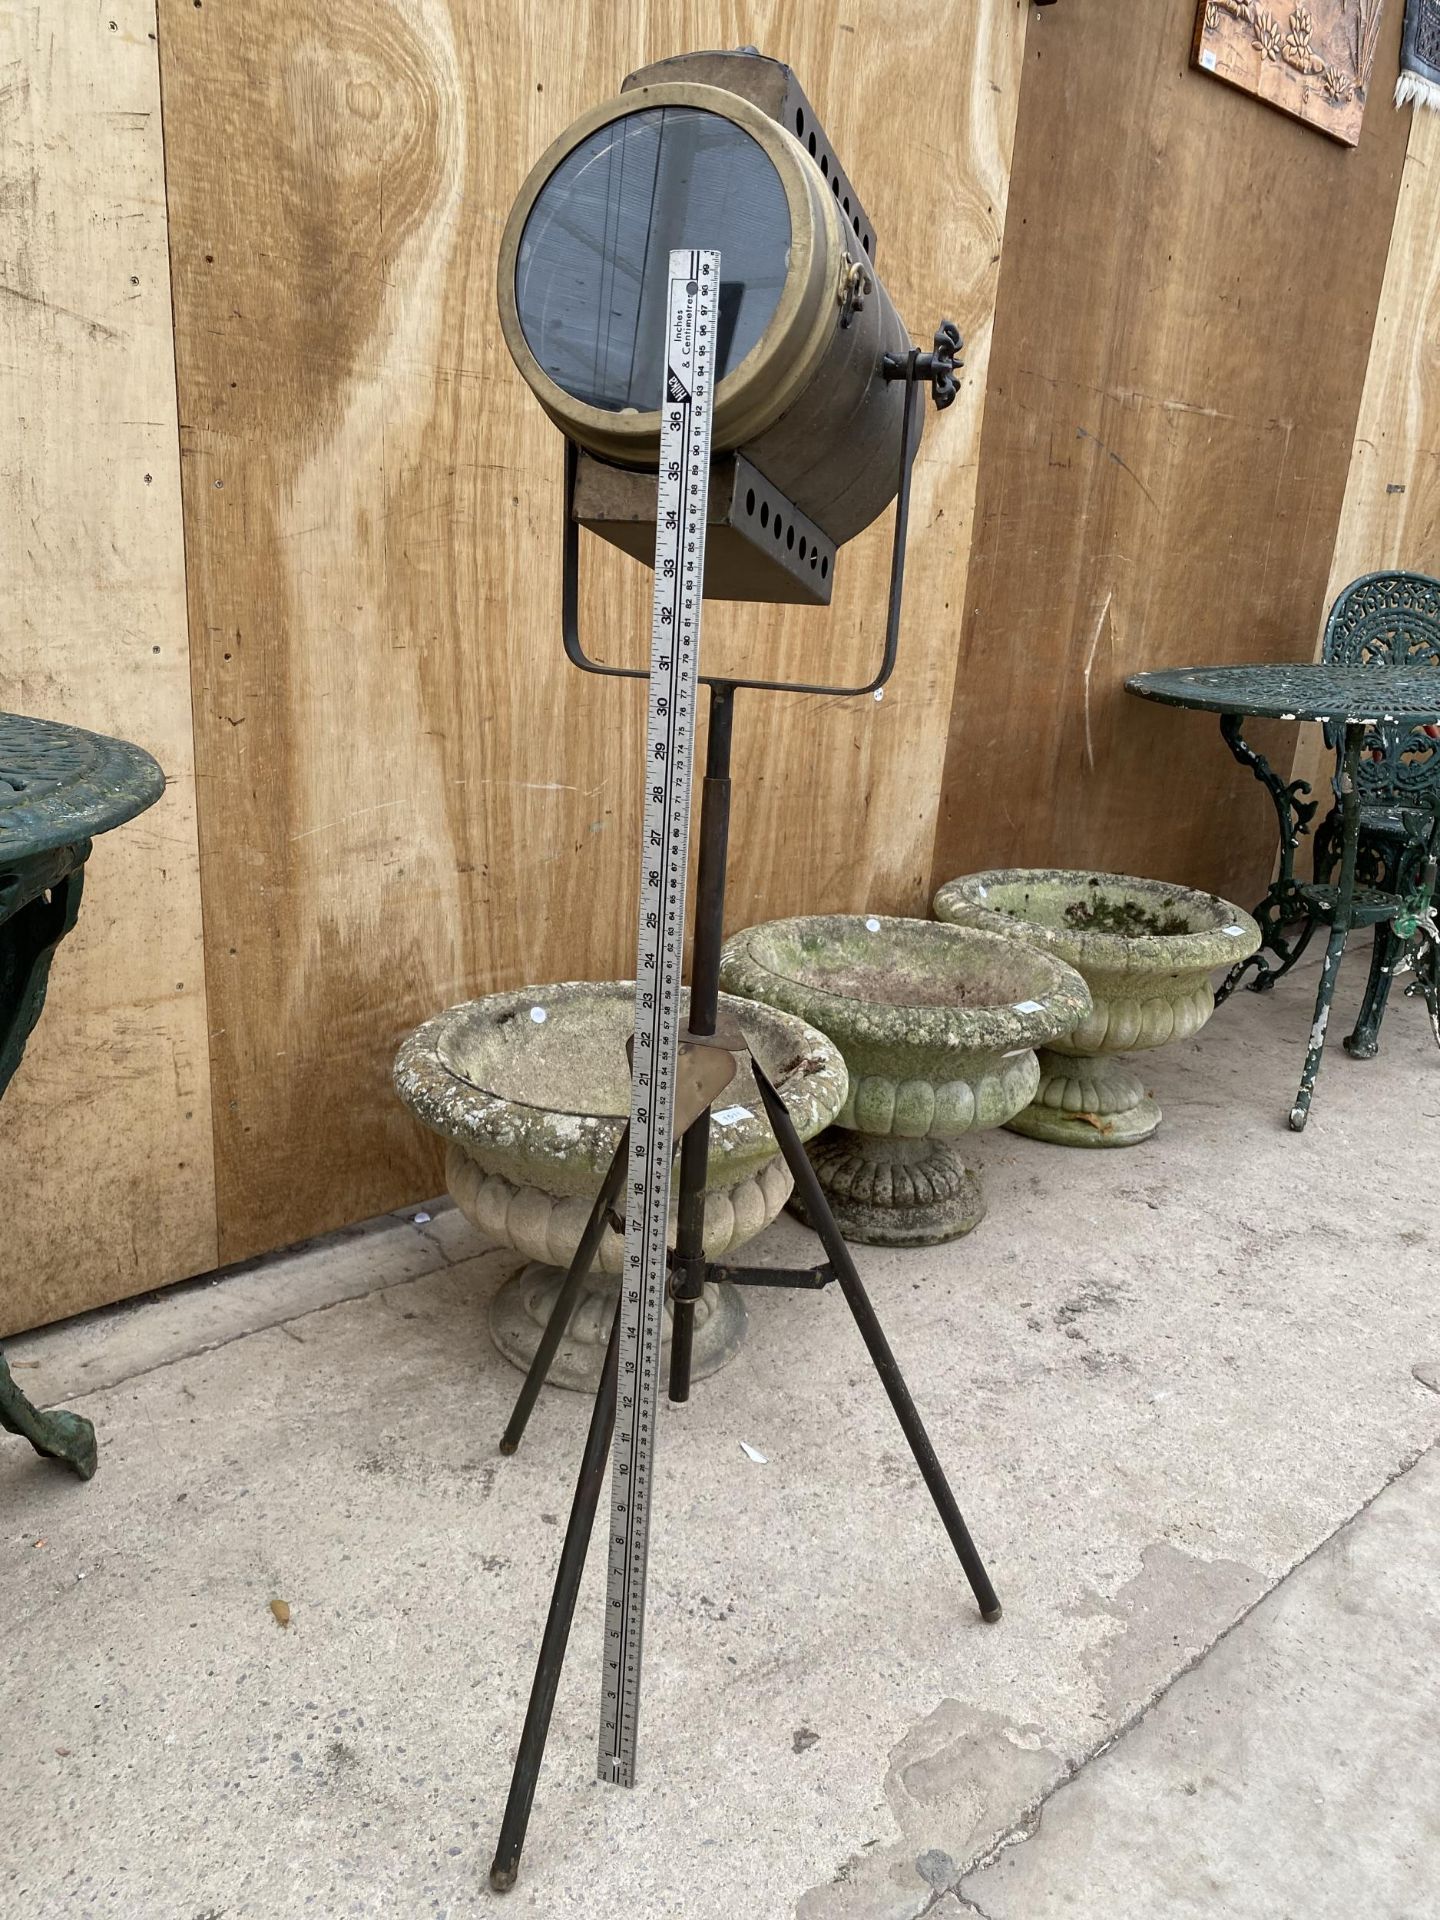 A VINTAGE STYLE THEARTE LIGHT FLOOR LAMP WITH TRIPOD BASE - Image 4 of 7